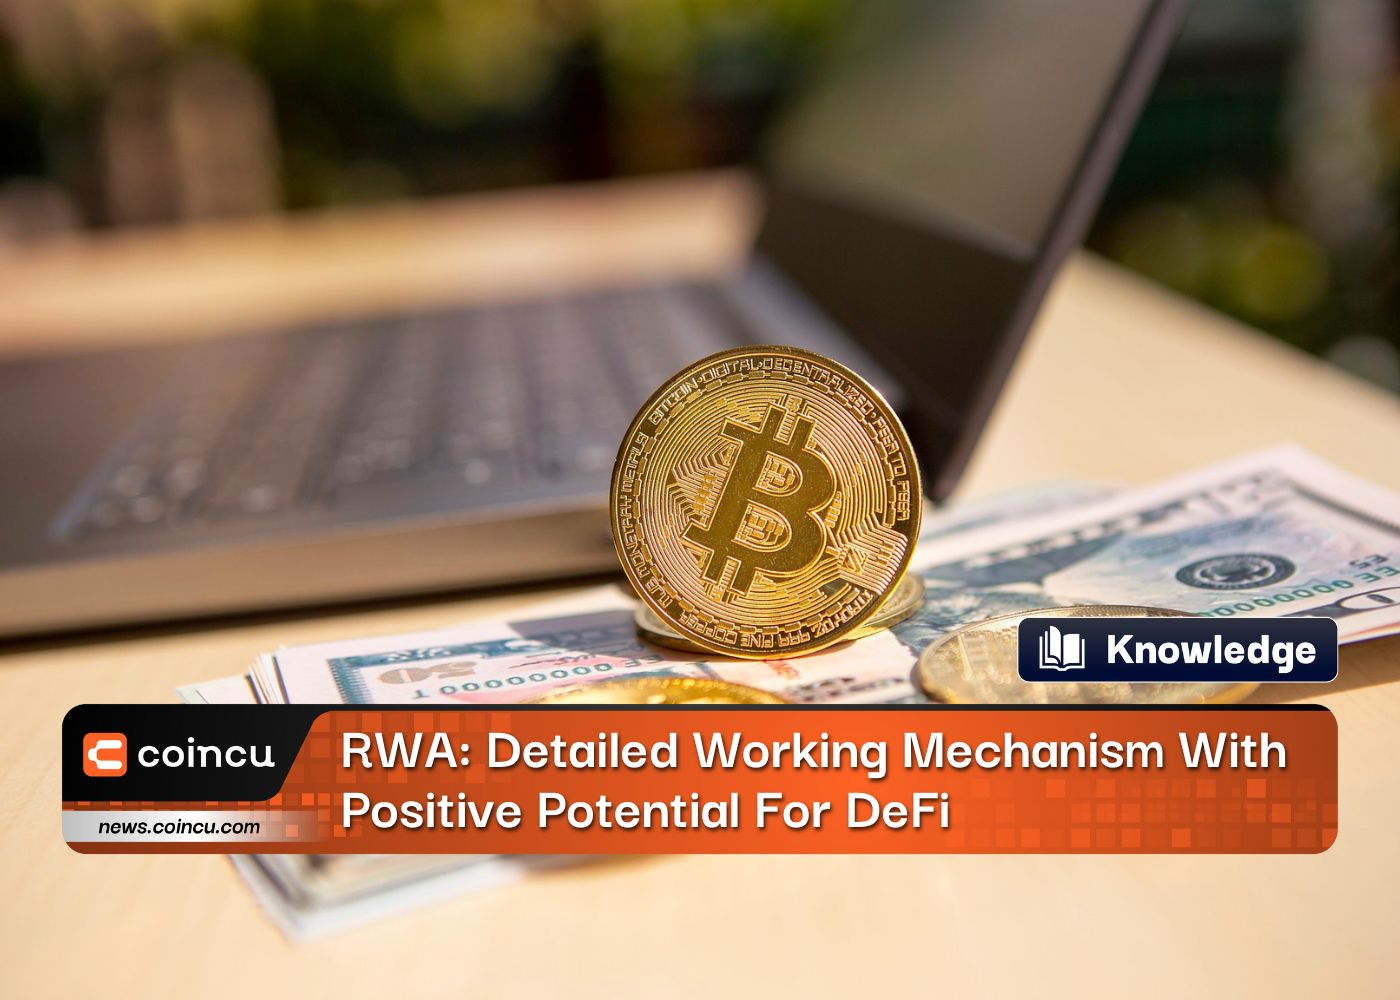 RWA: Detailed Working Mechanism With Positive Potential For DeFi